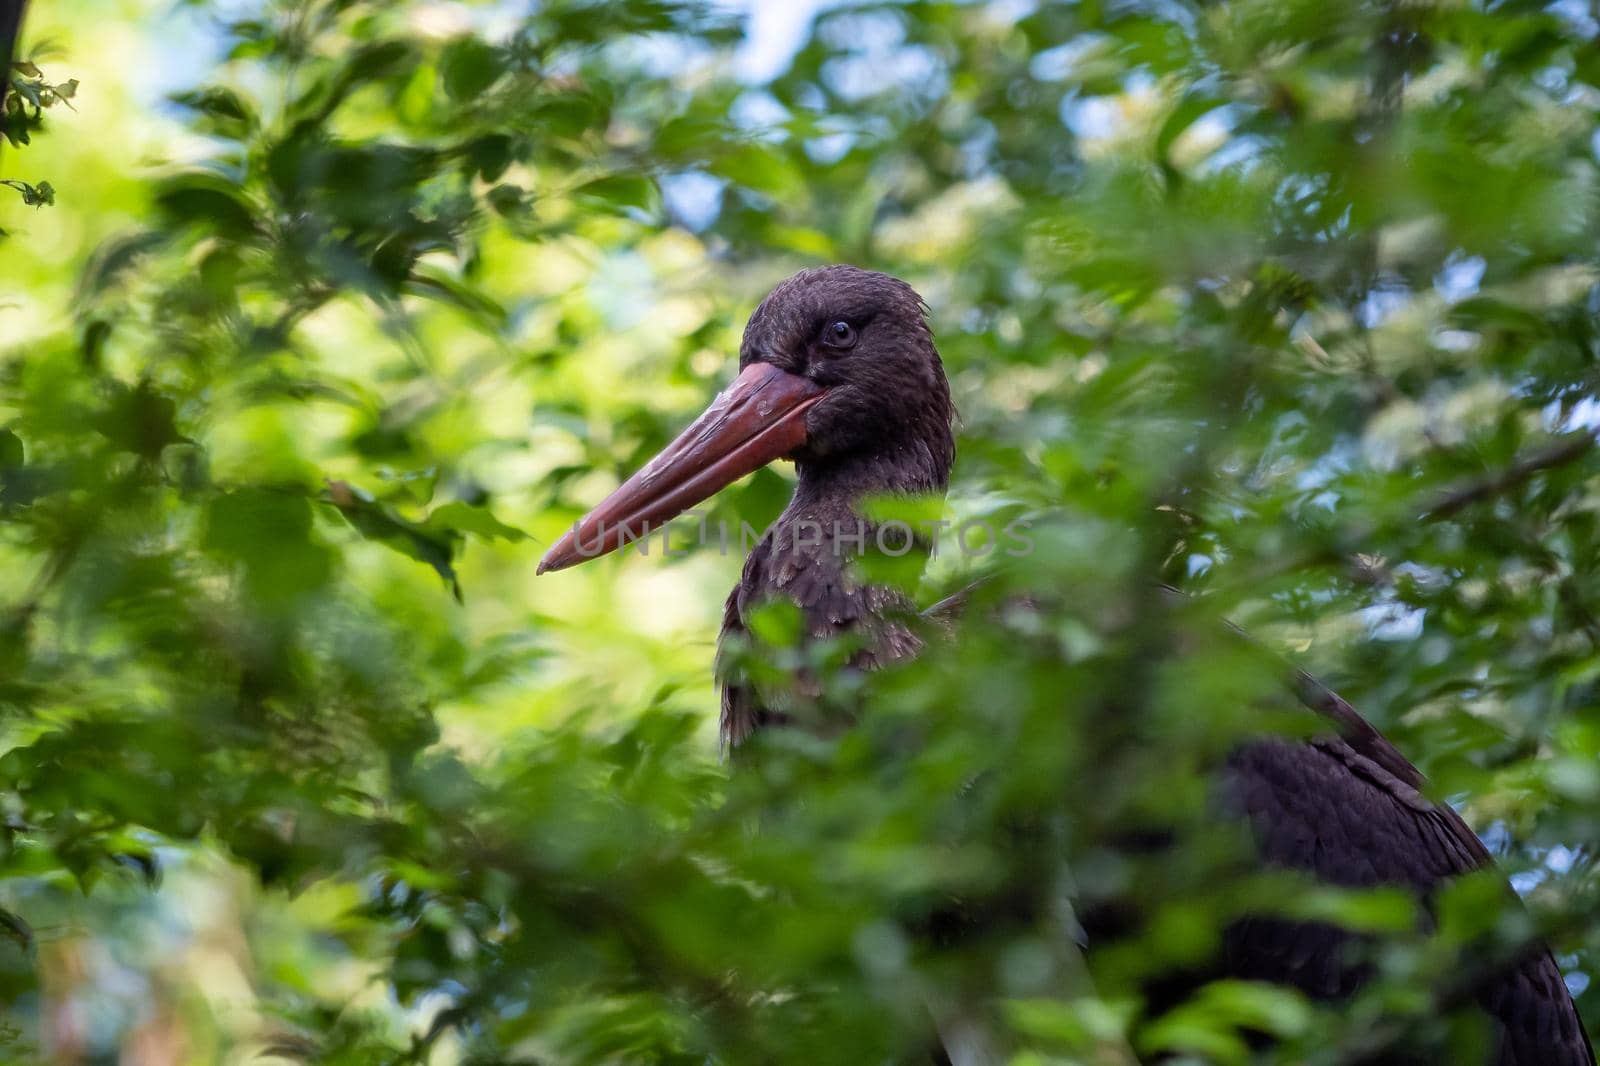 Black stork sitting in the branches of a tree